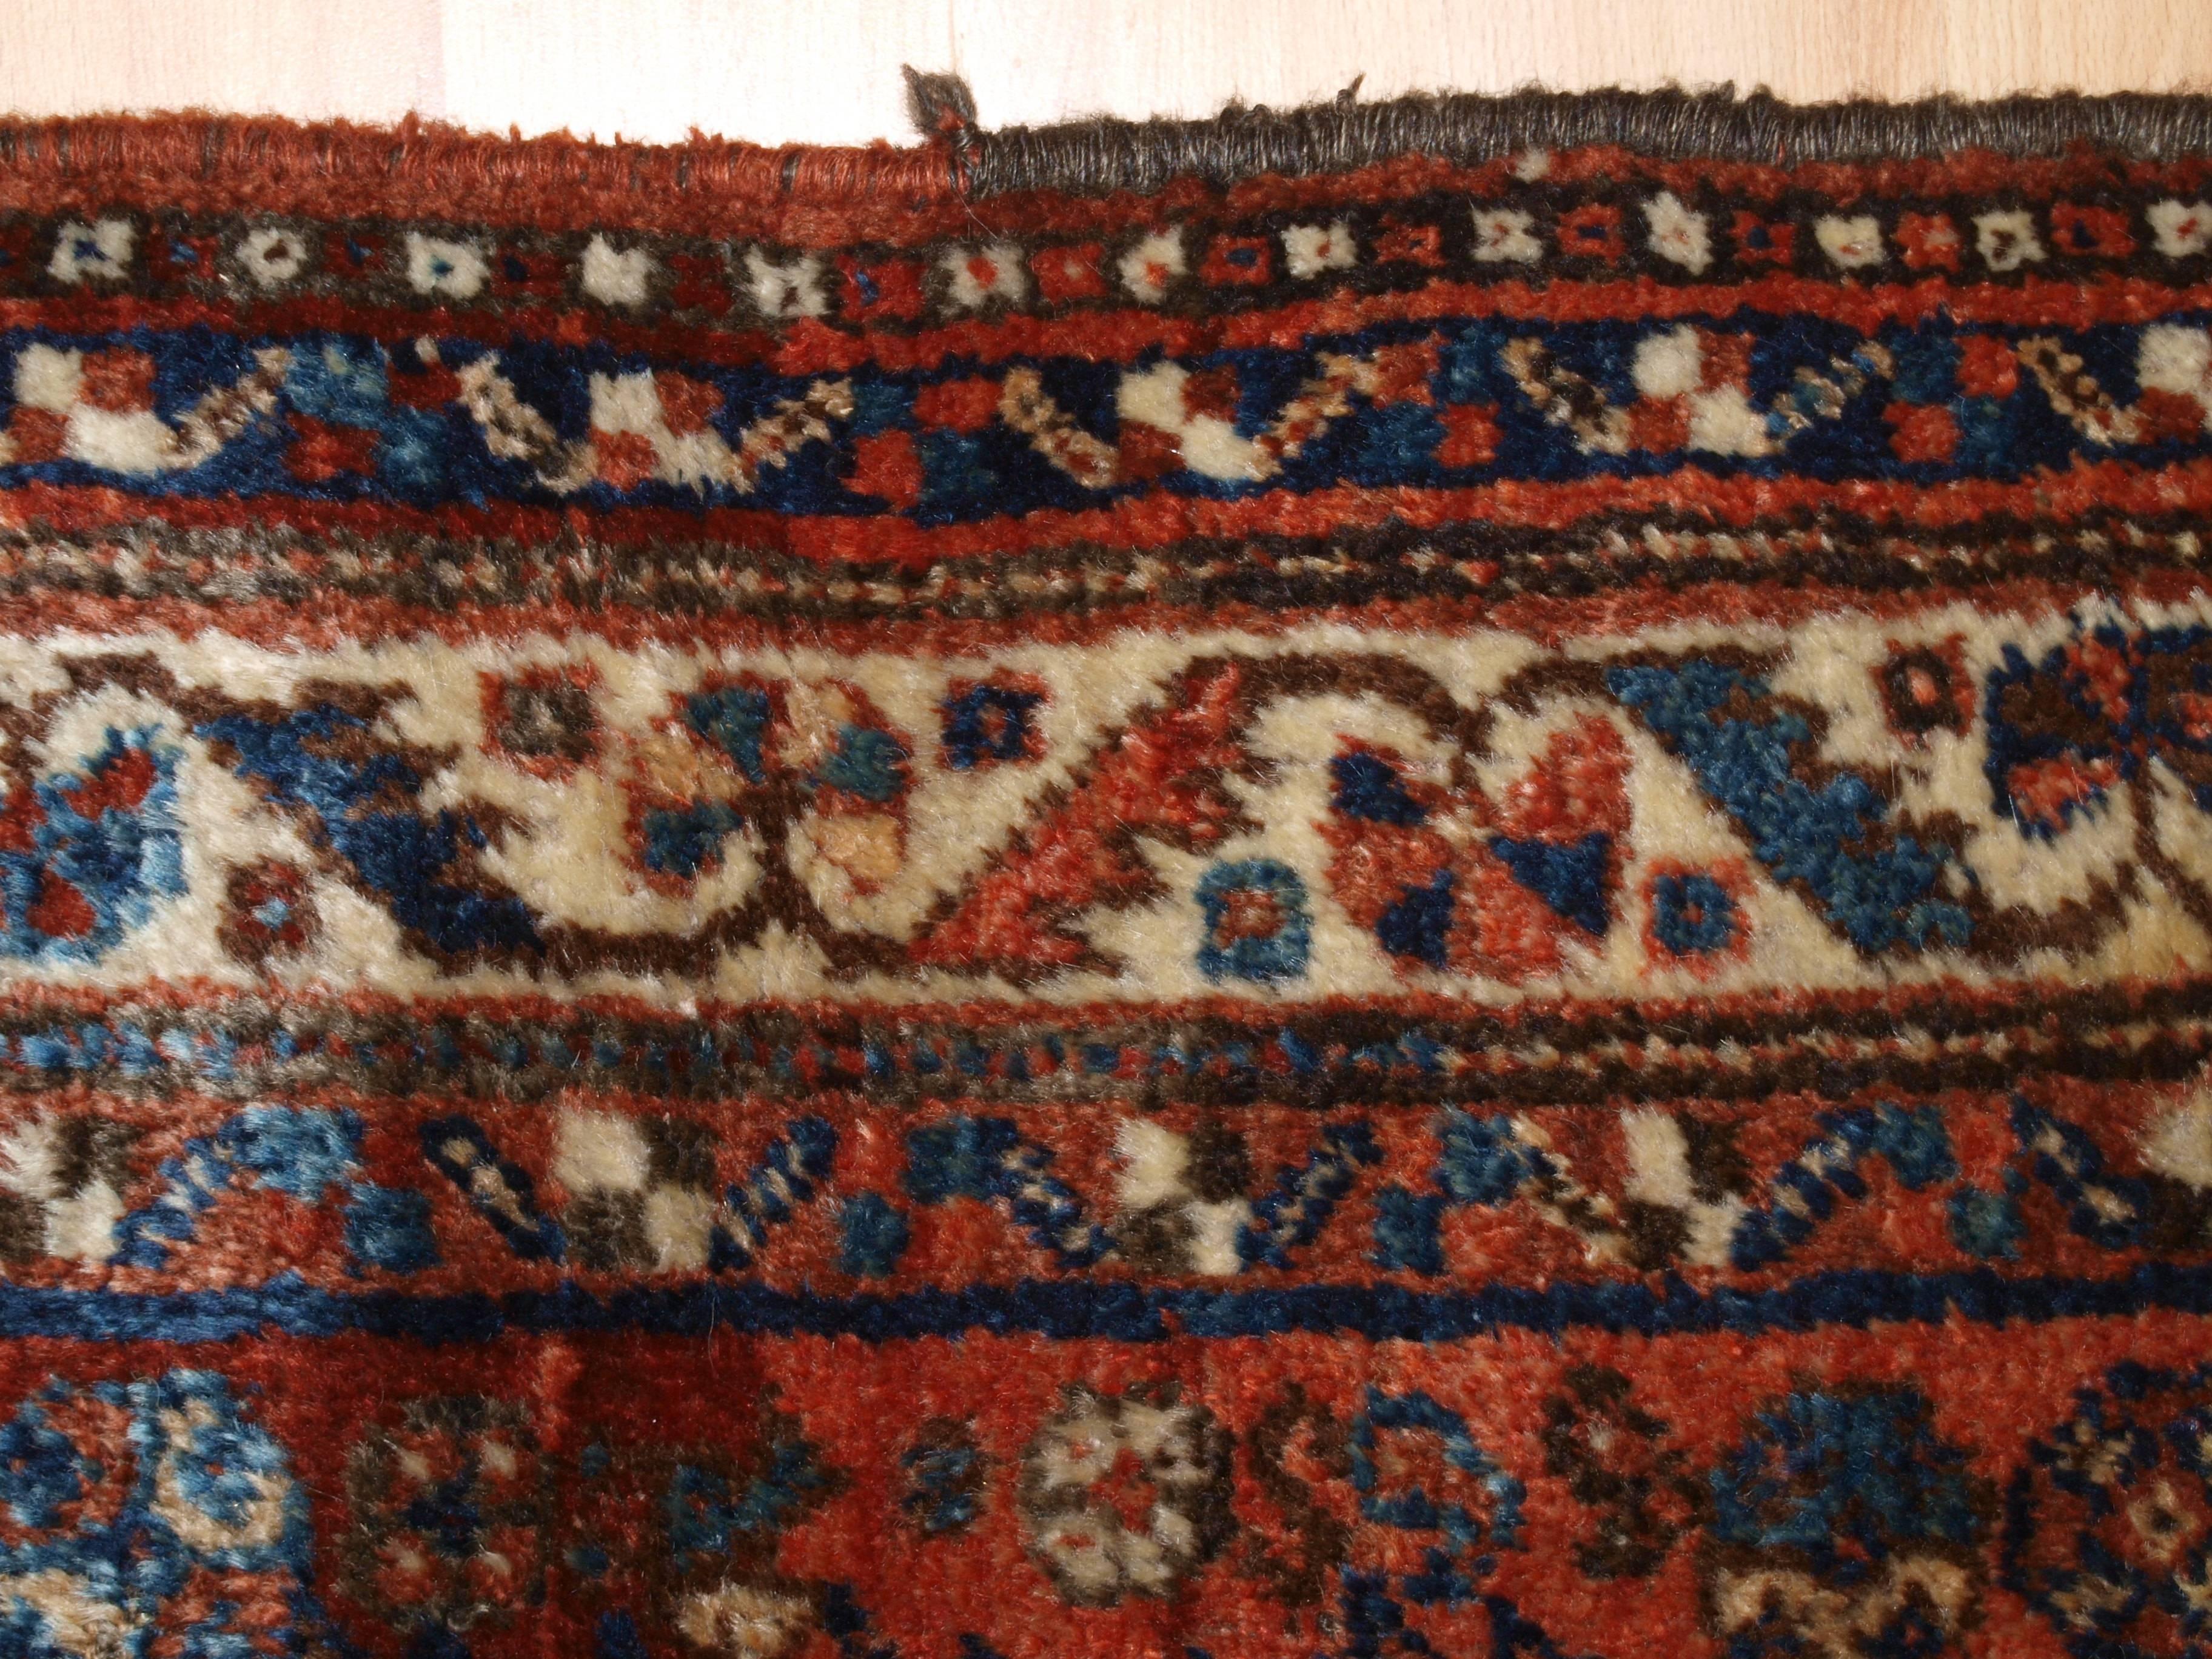 Old South West Persian Tribal Rug, Shiraz Region In Excellent Condition For Sale In Moreton-in-Marsh, GB